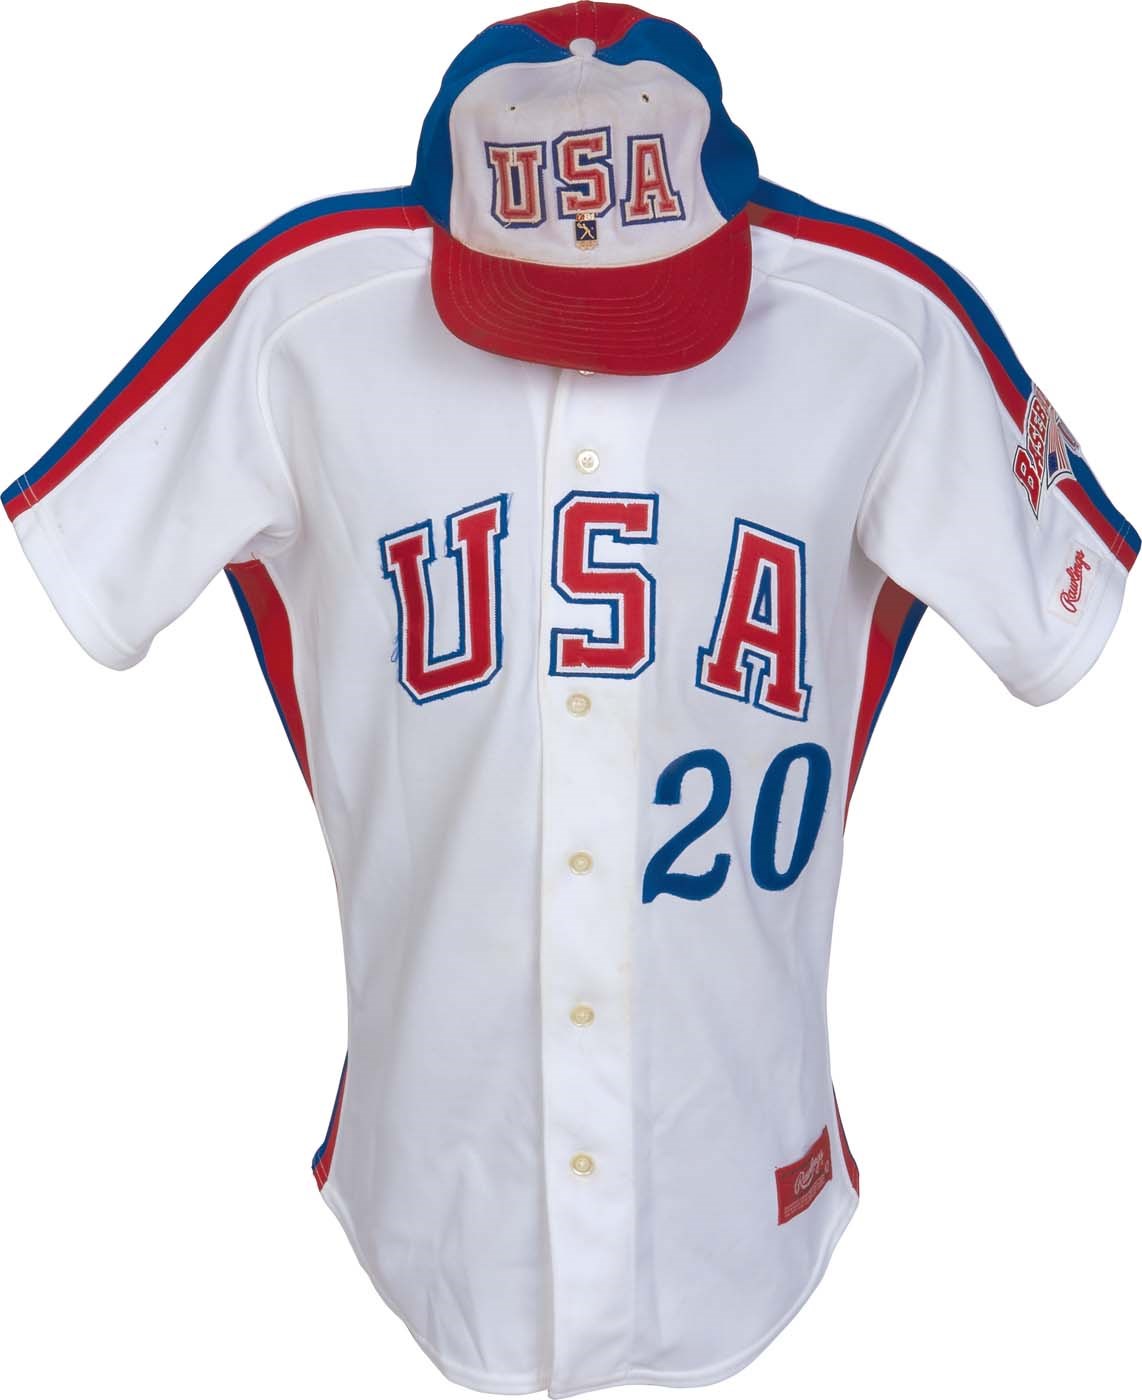 The 1984 USA Baseball Olympian Collection - 1984 Olympics John Marzano USA Game Worn Home-Run Uniform - First USA HR of the '84 Games (Photo-Matched)